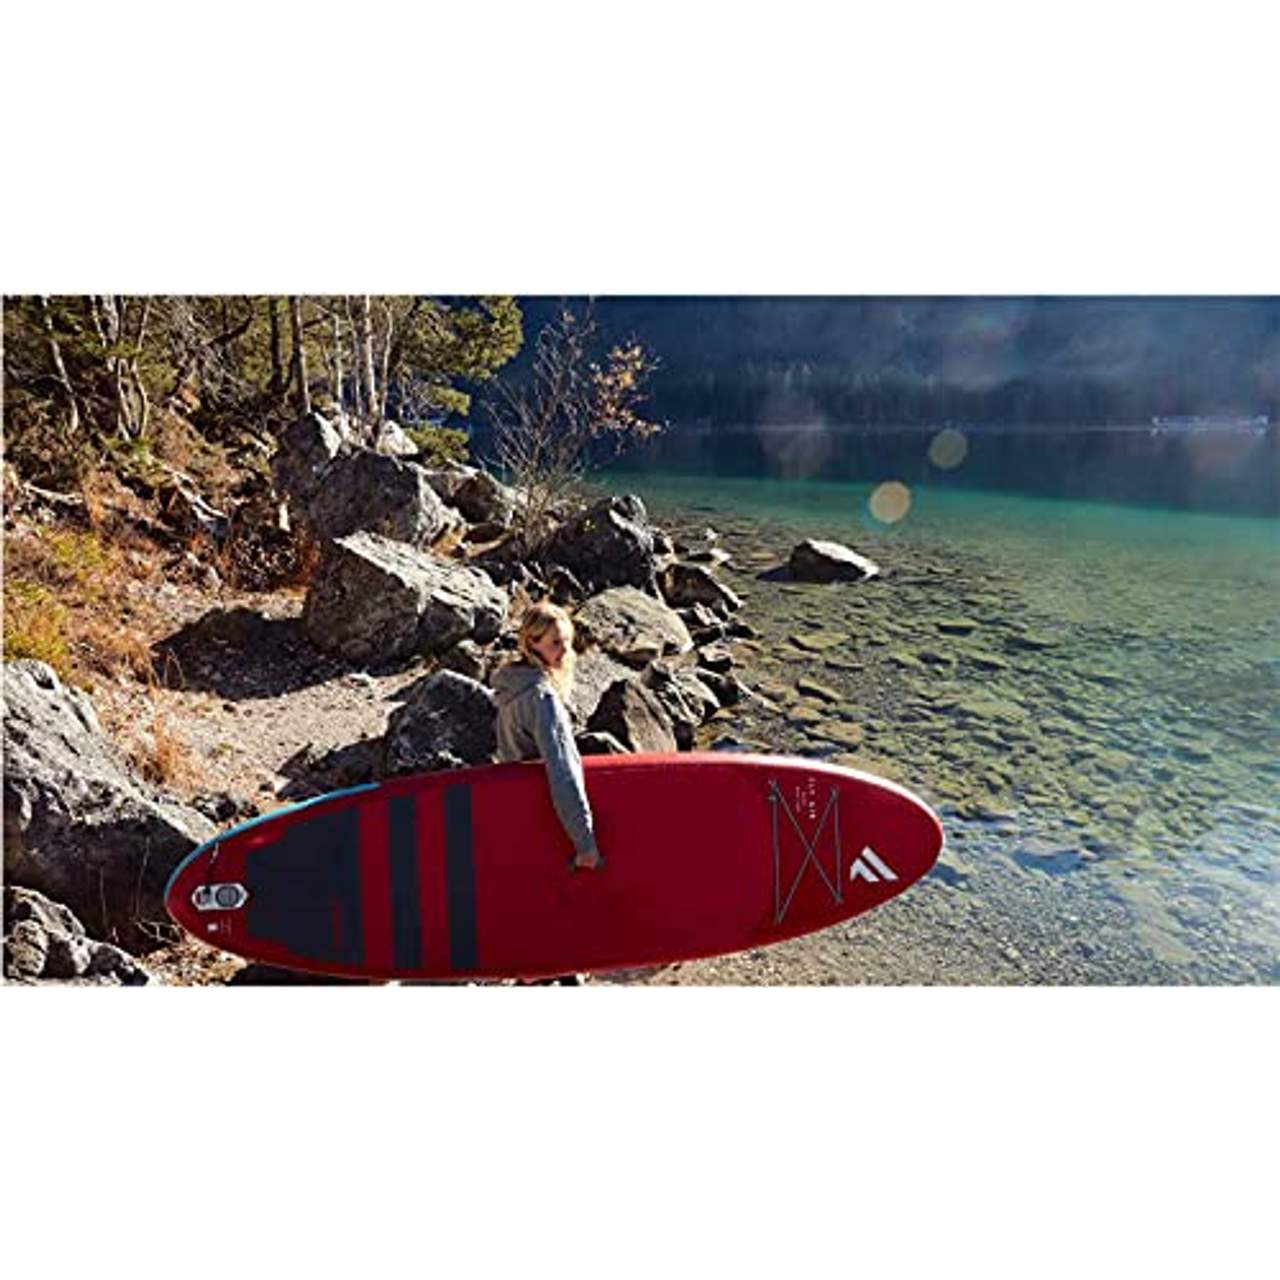 Fanatic Fly Air Pure Inflatable SUP 10.4 Stand up Paddle Board 315cm